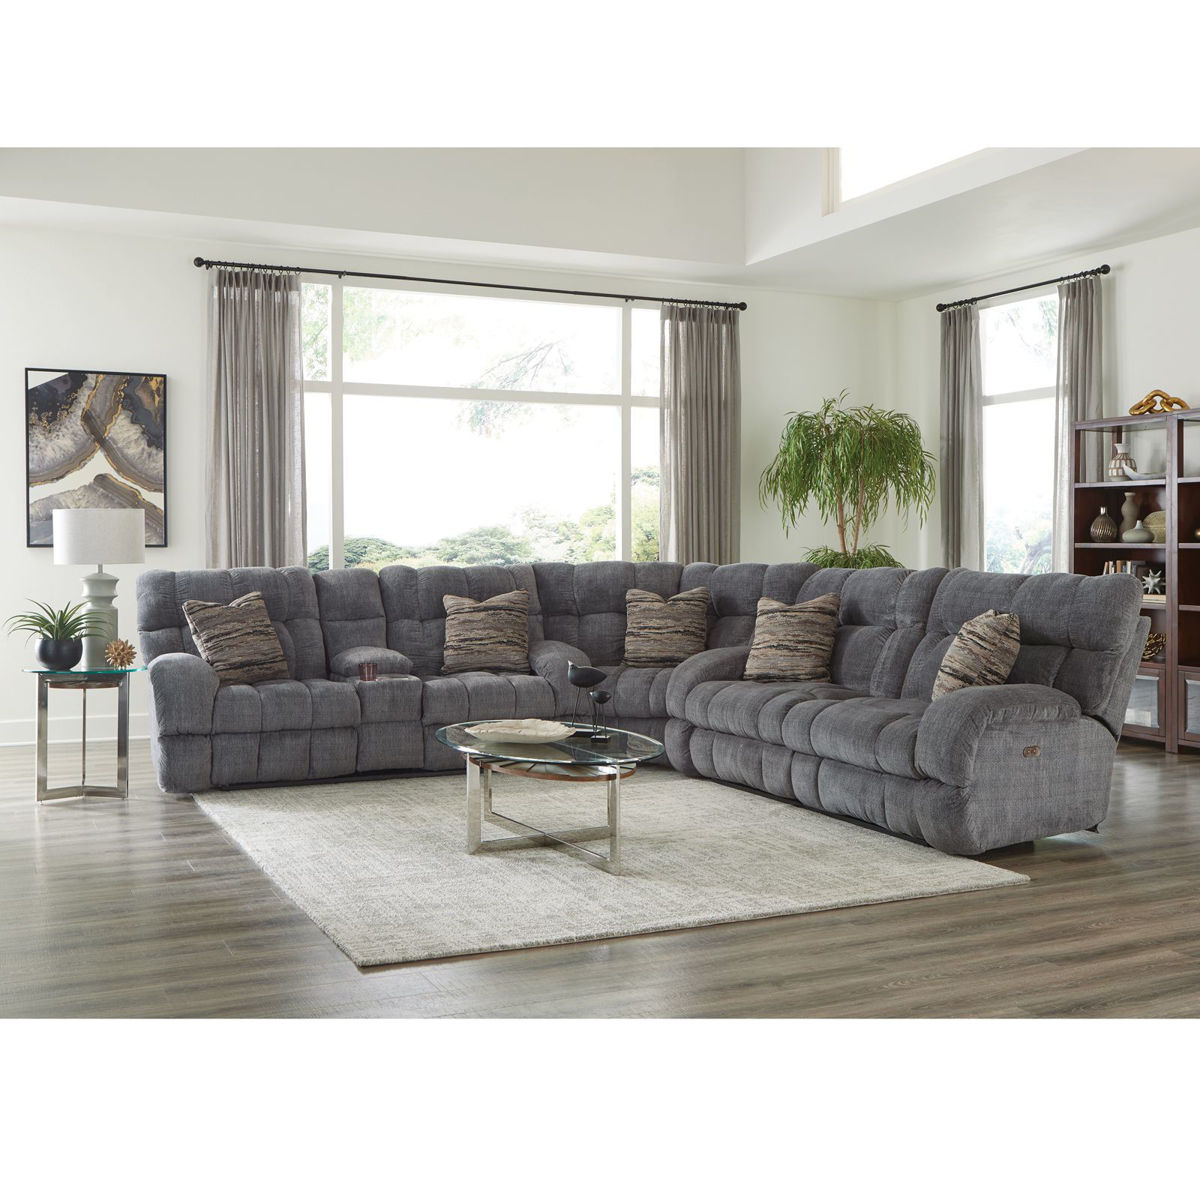 Picture of Ashland Granite 3-Piece Power Recliner Sectional